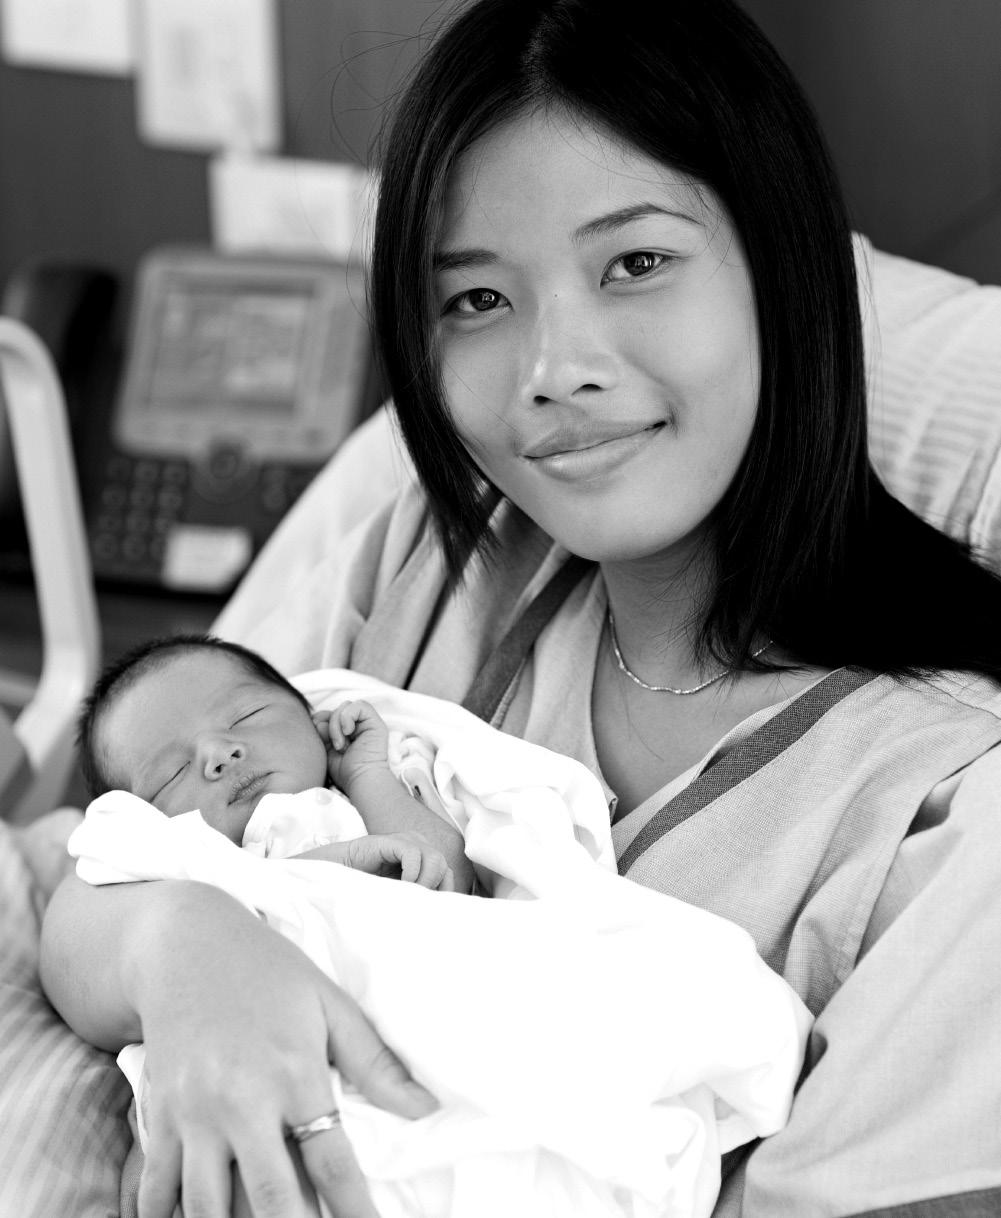 IV Fluids For the safety of you and your baby, most health care providers prefer IV access to provide fluids or medications. An IV will not limit your mobility during labor.